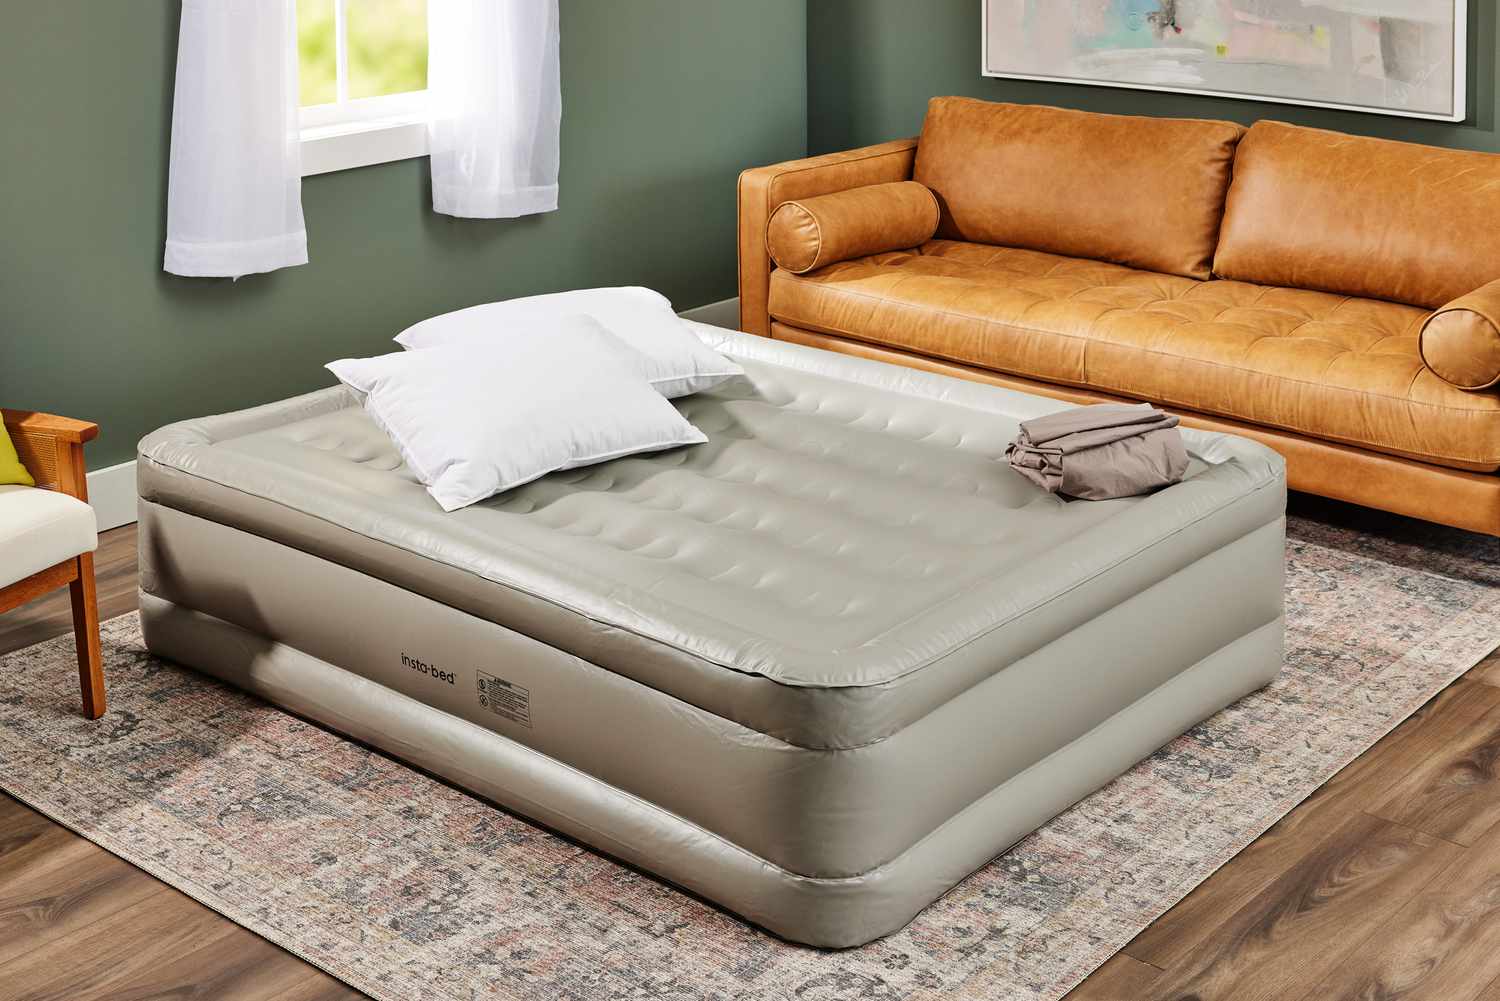 The Insta-Bed Raised 18-in Queen Pillow Top Air Mattress & Internal Never Flat Pump fully inflated